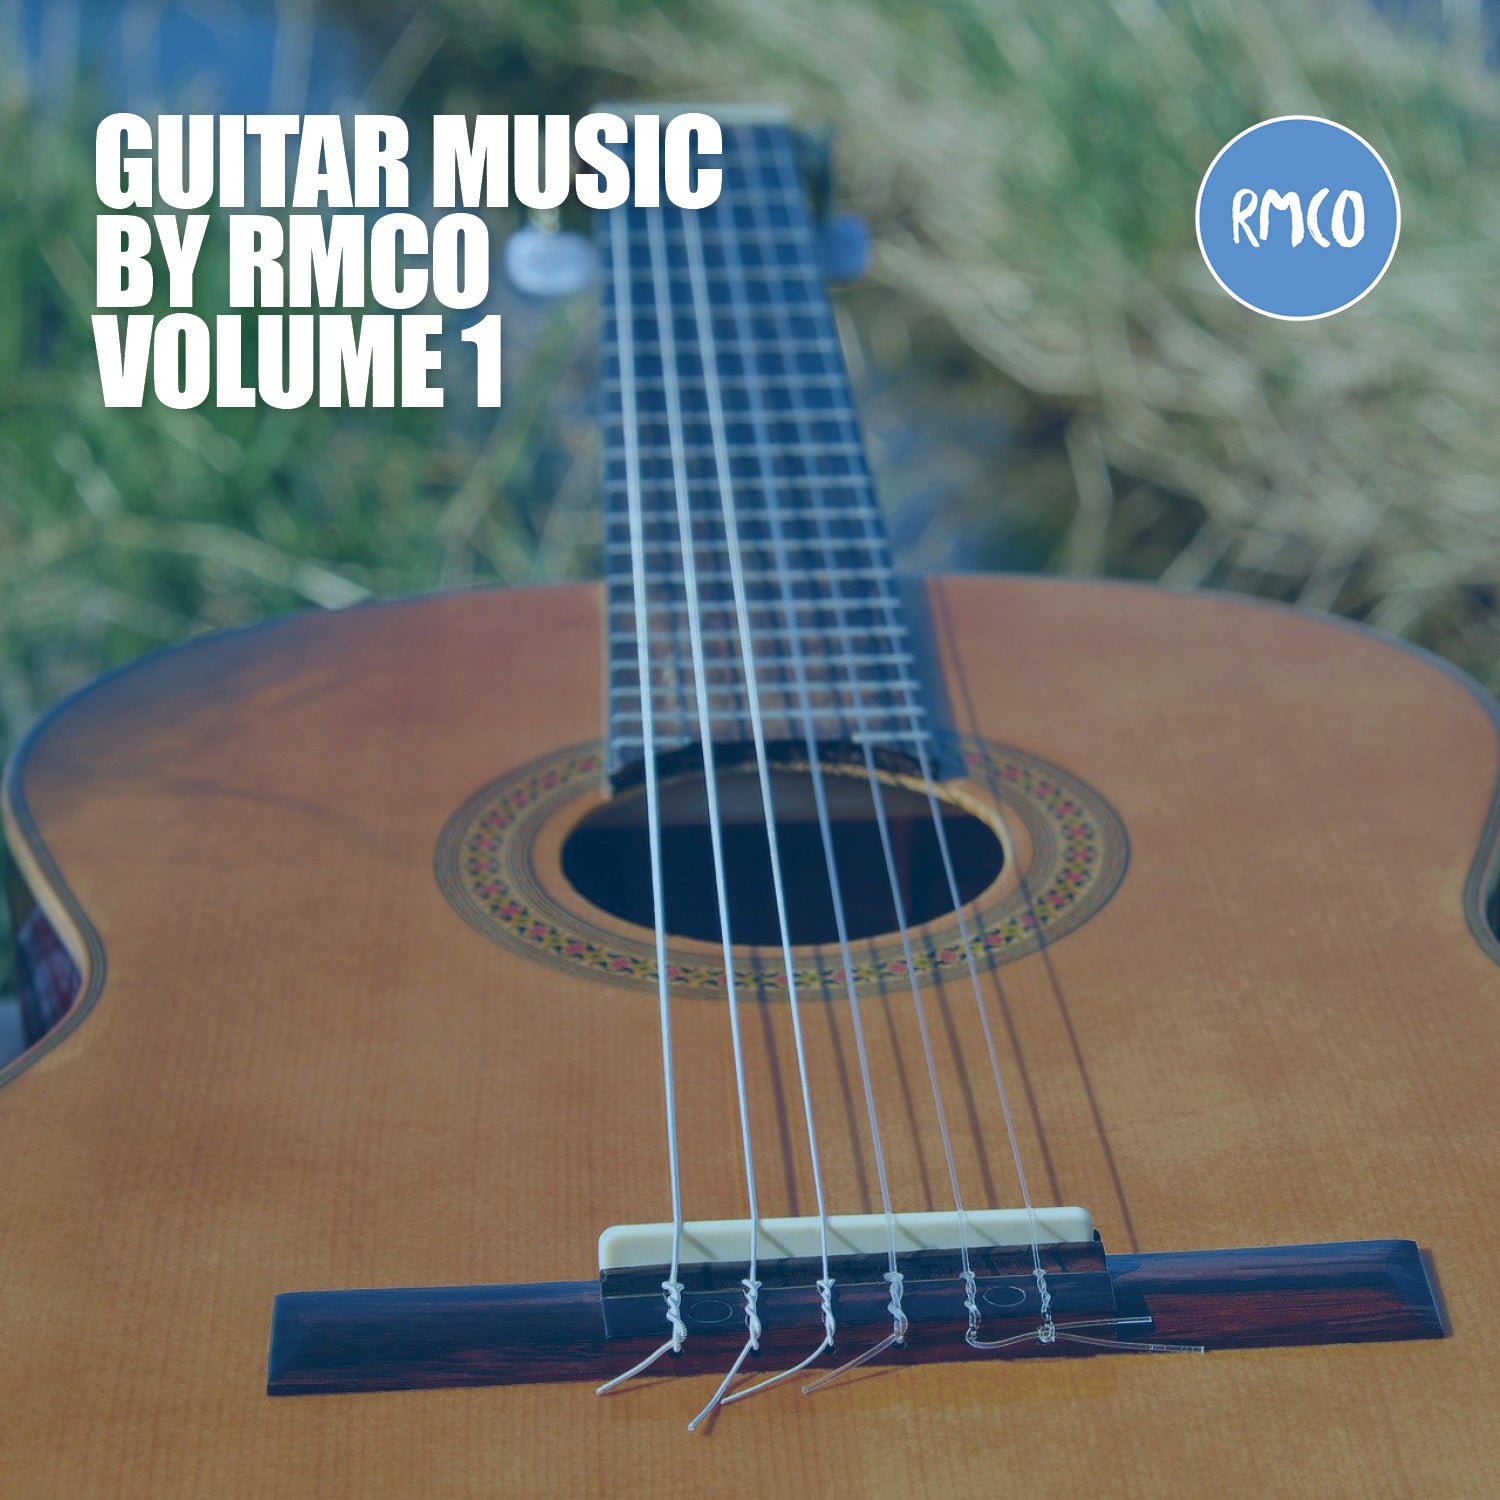 Guitar Music, Vol. 1 by RMCO